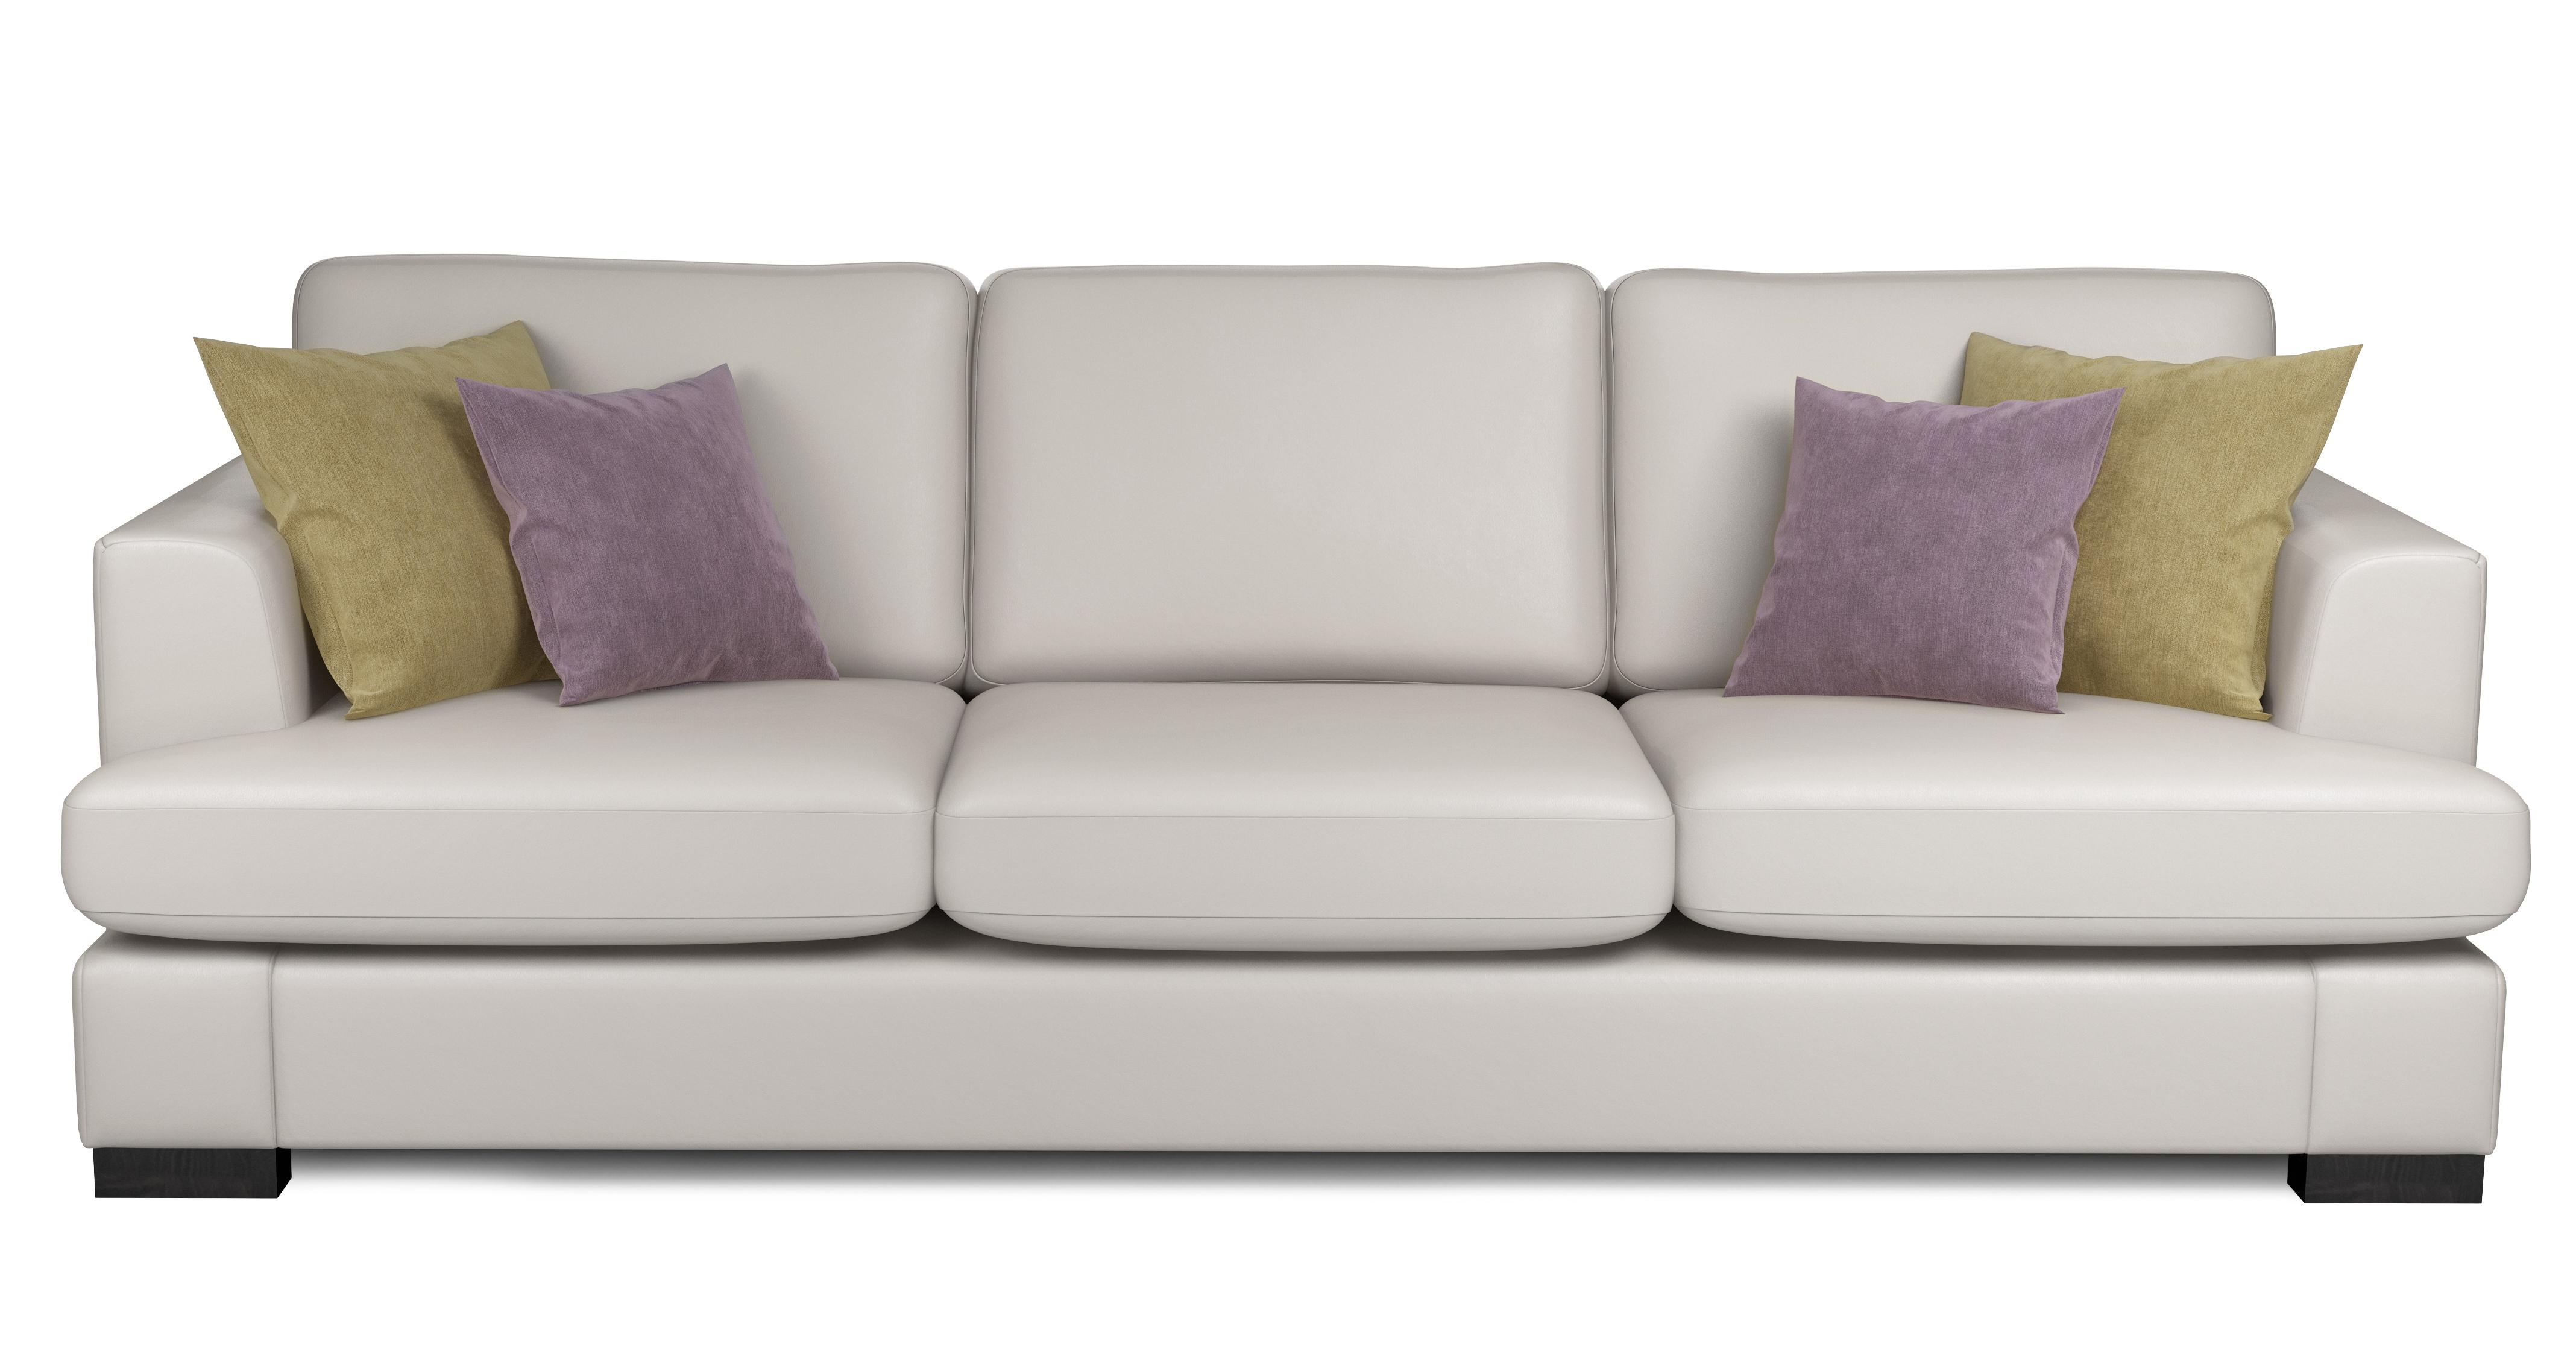 4 seater leather sofa dfs